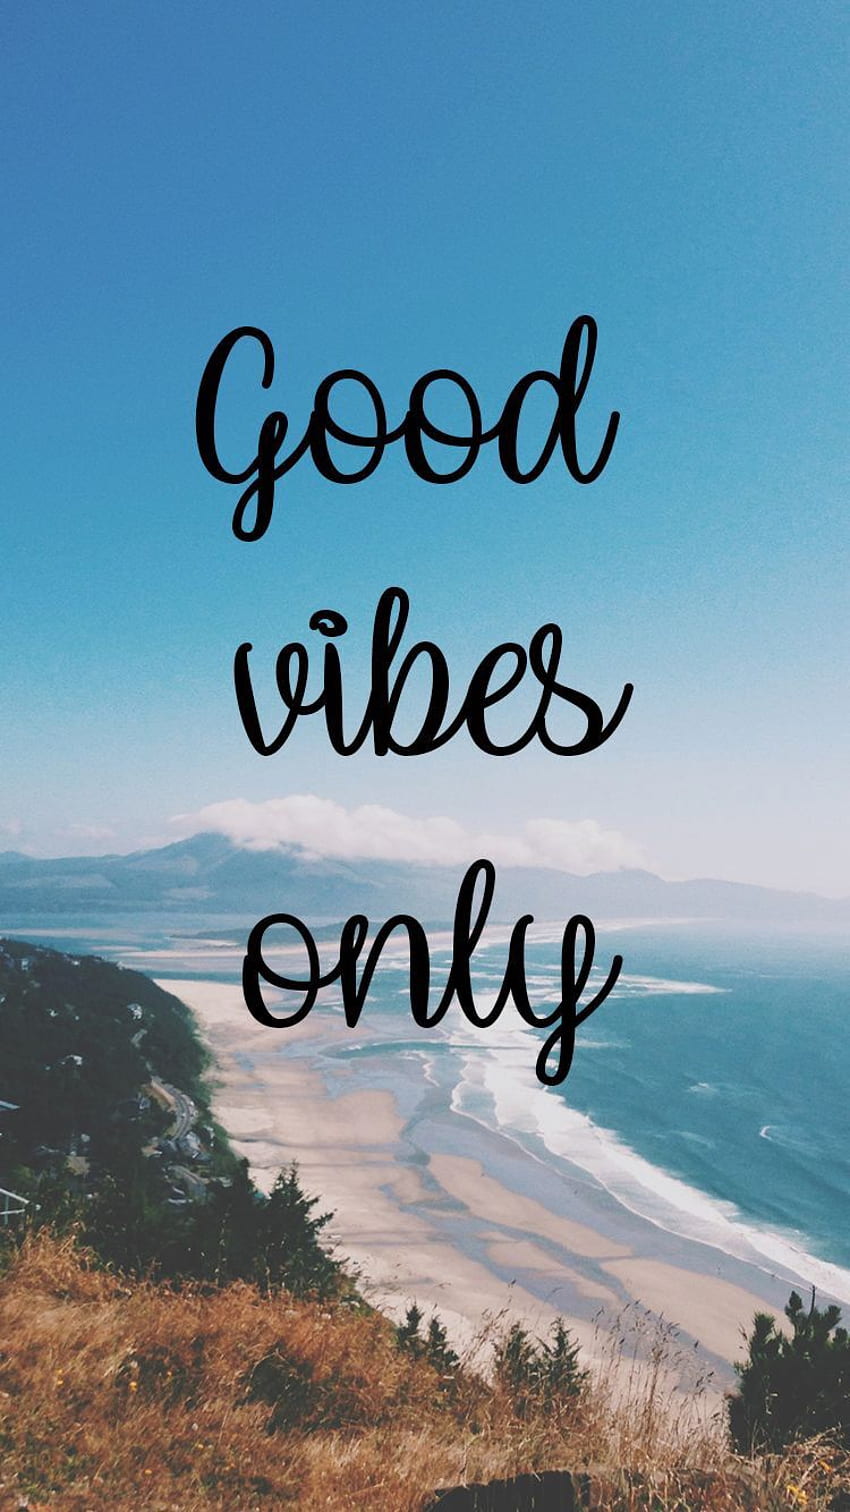 Good Vibes Images  Free Photos PNG Stickers Wallpapers  Backgrounds   rawpixel